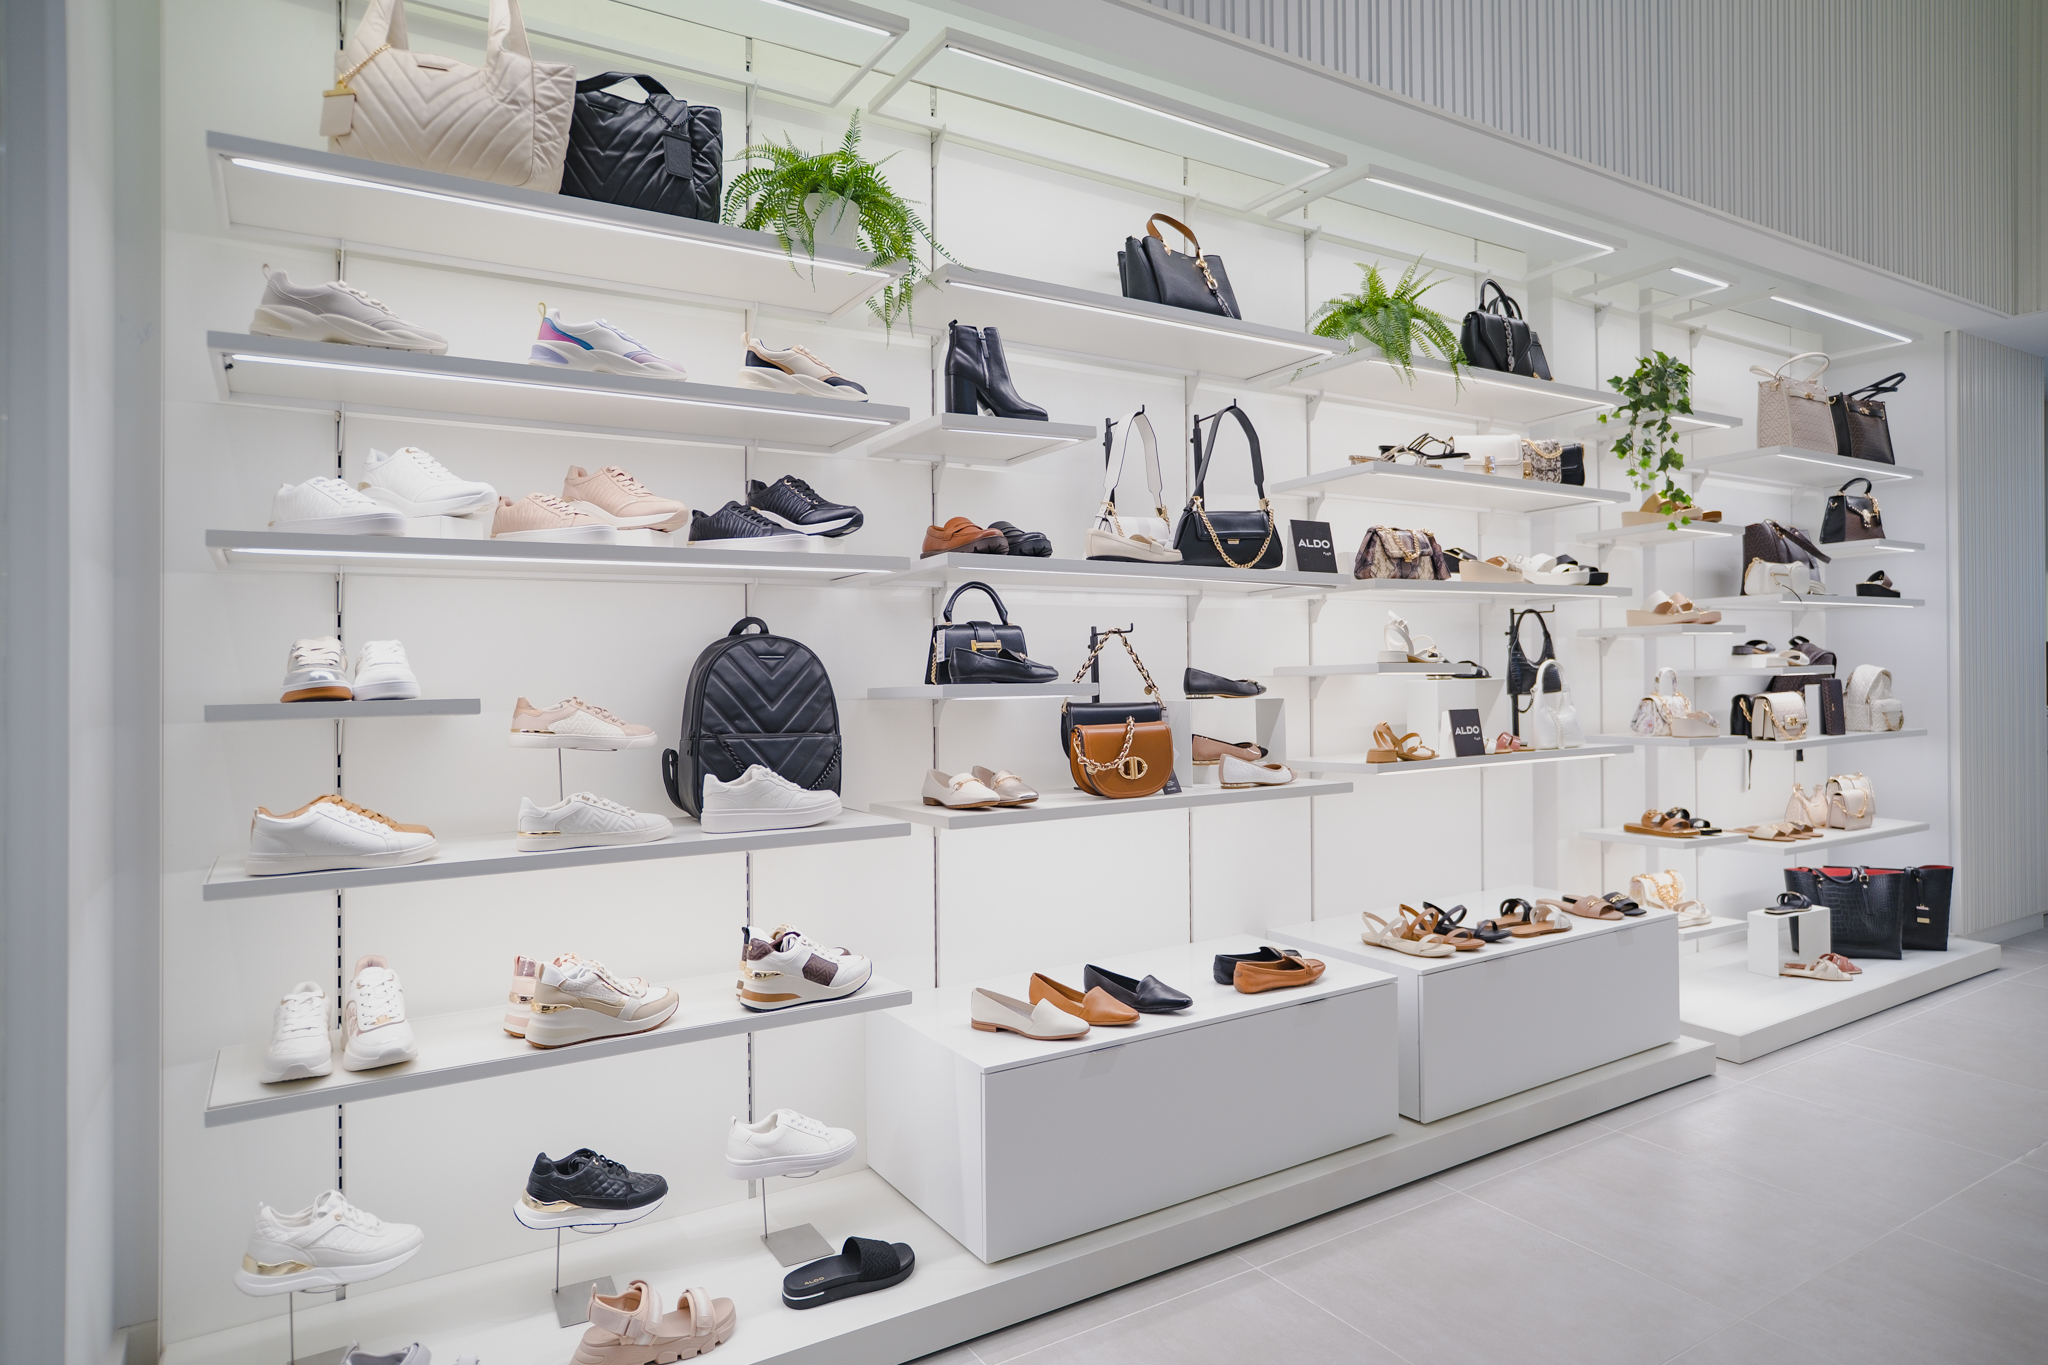 ALDO Celebrates New Milestone With Opening Of 14th Outlet In The ...